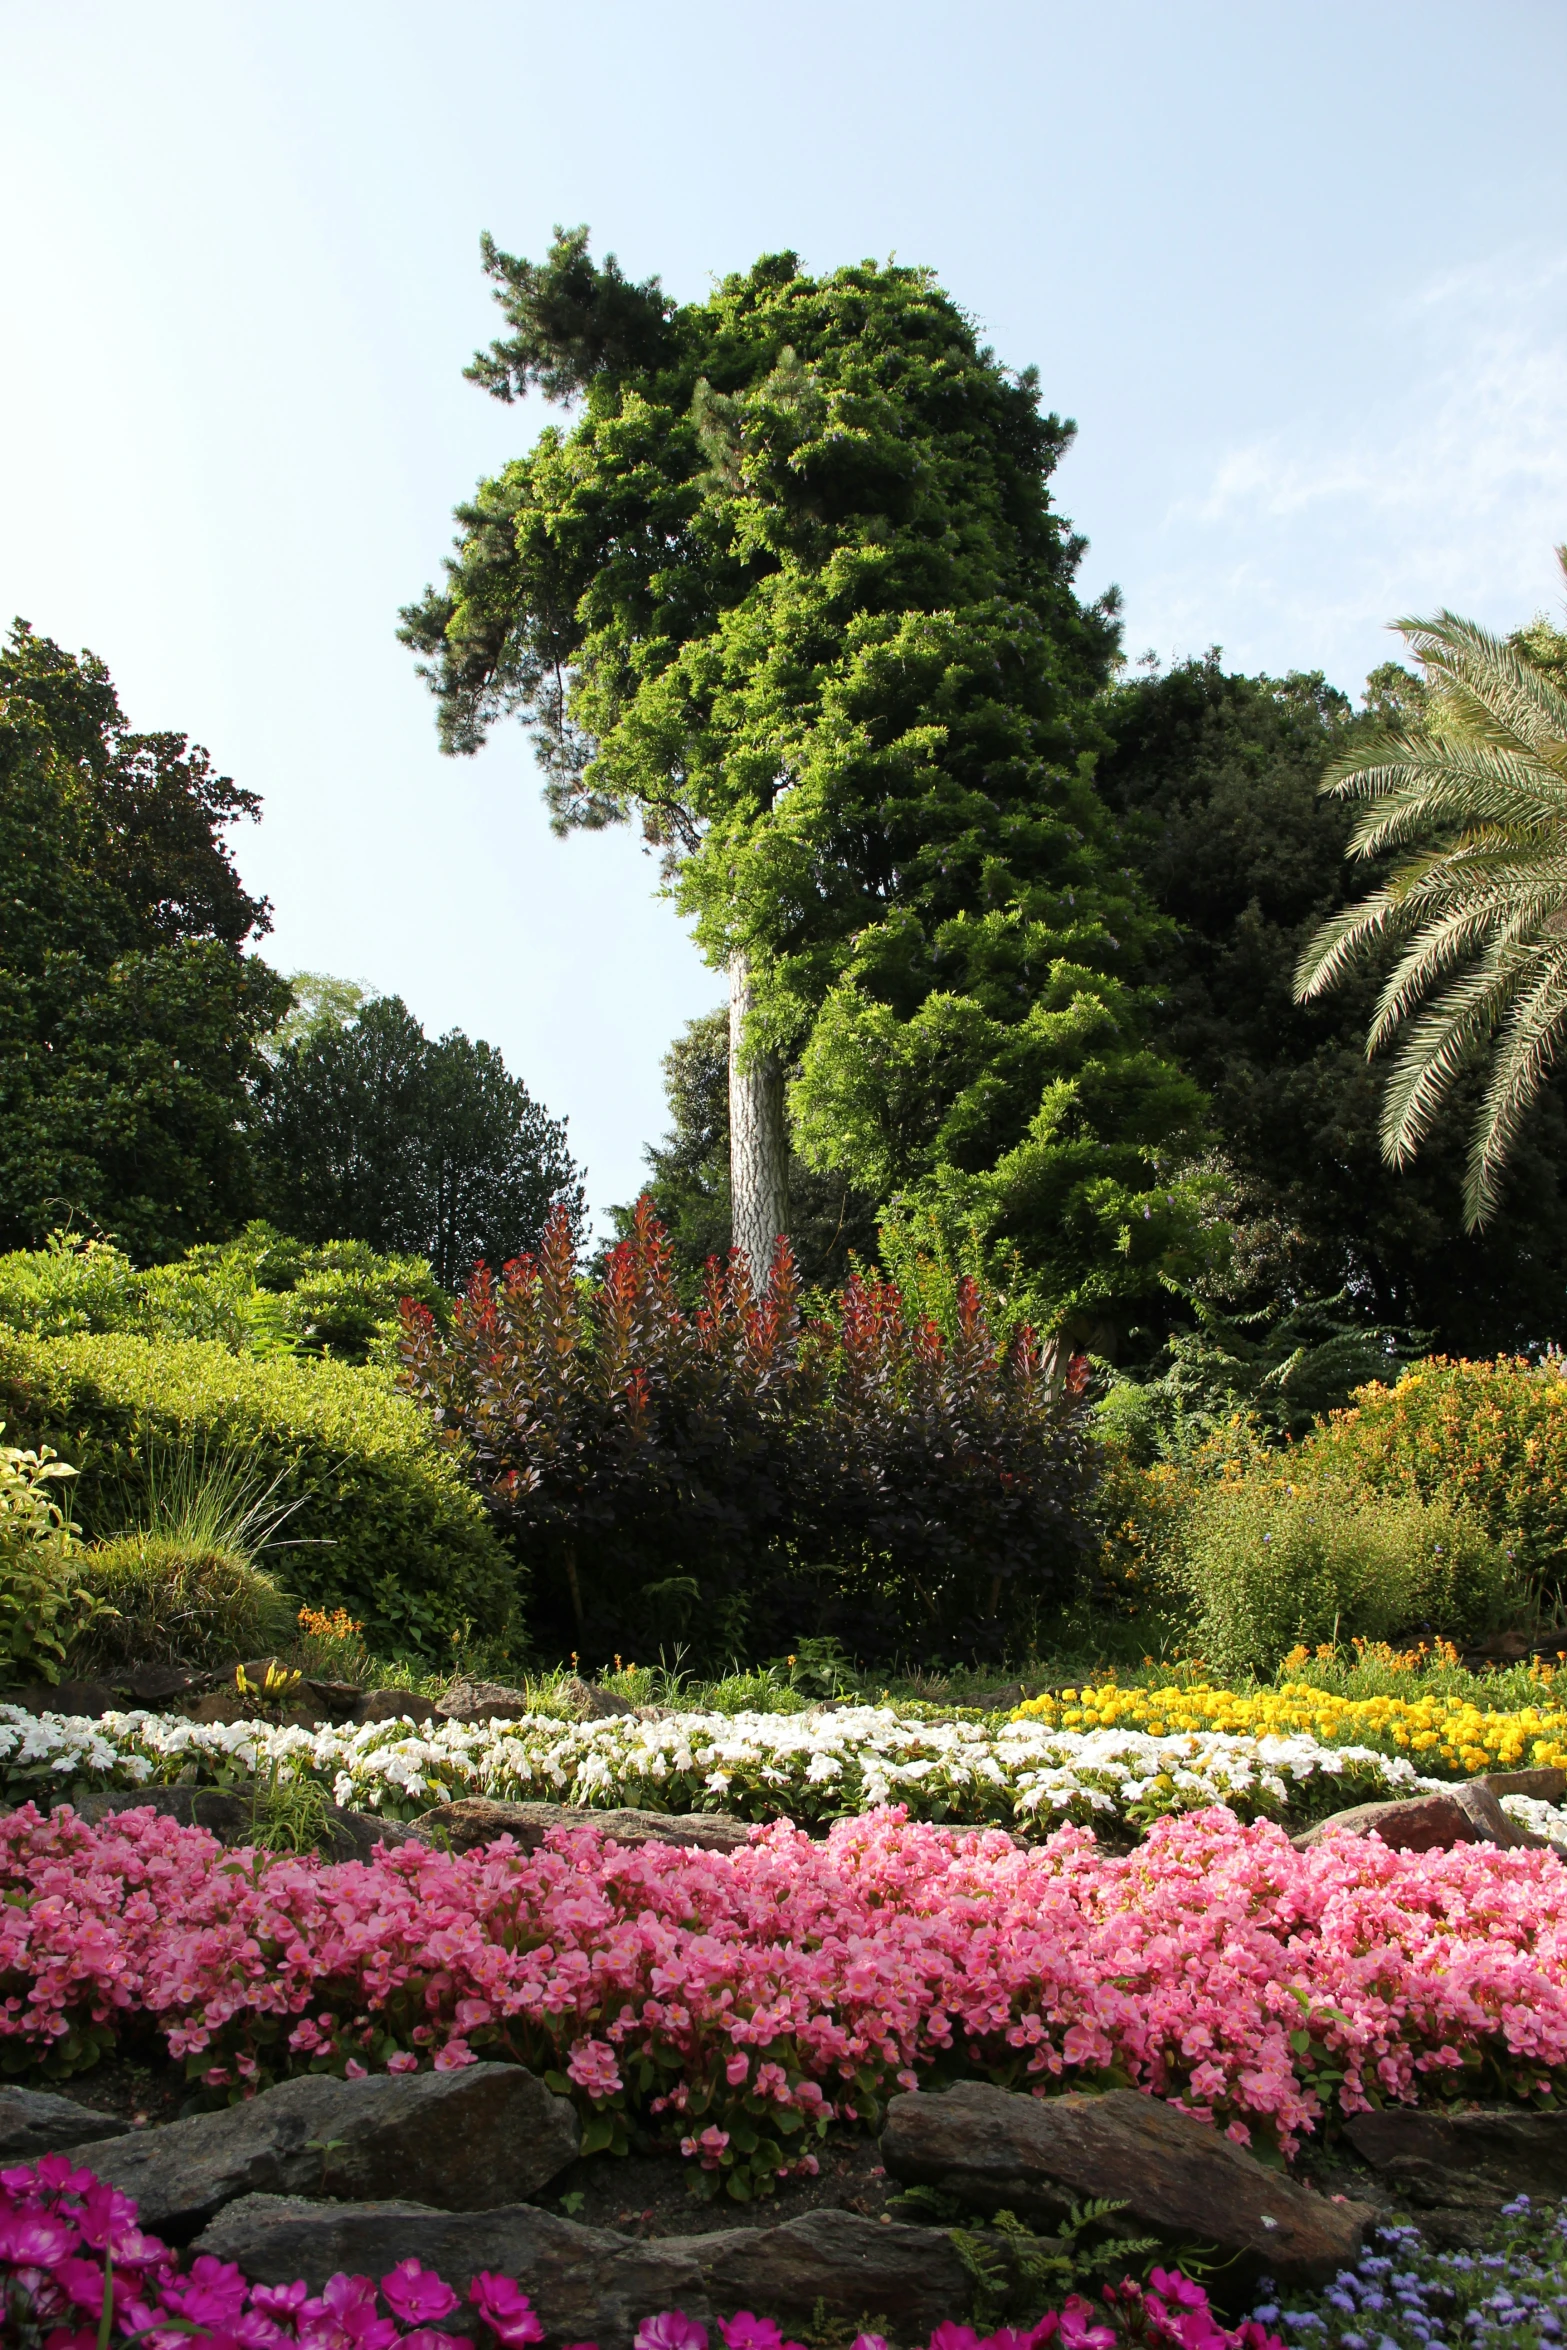 the park has many flower garden and trees